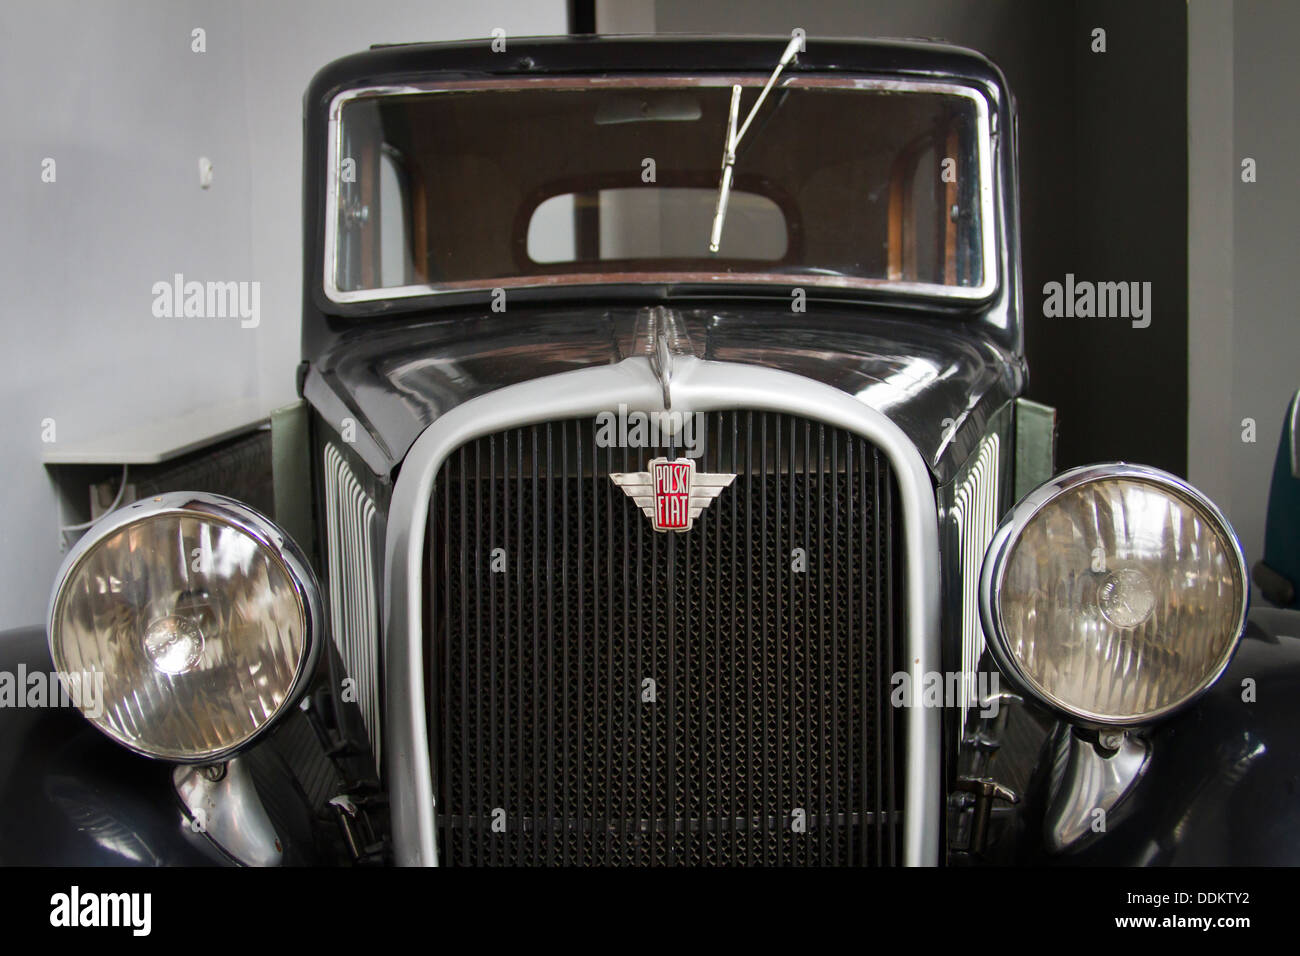 Polski Fiat 518 Mazur produced in the years 1937-1939. Museum of Municipal Engineering in Krakow, Poland. Stock Photo